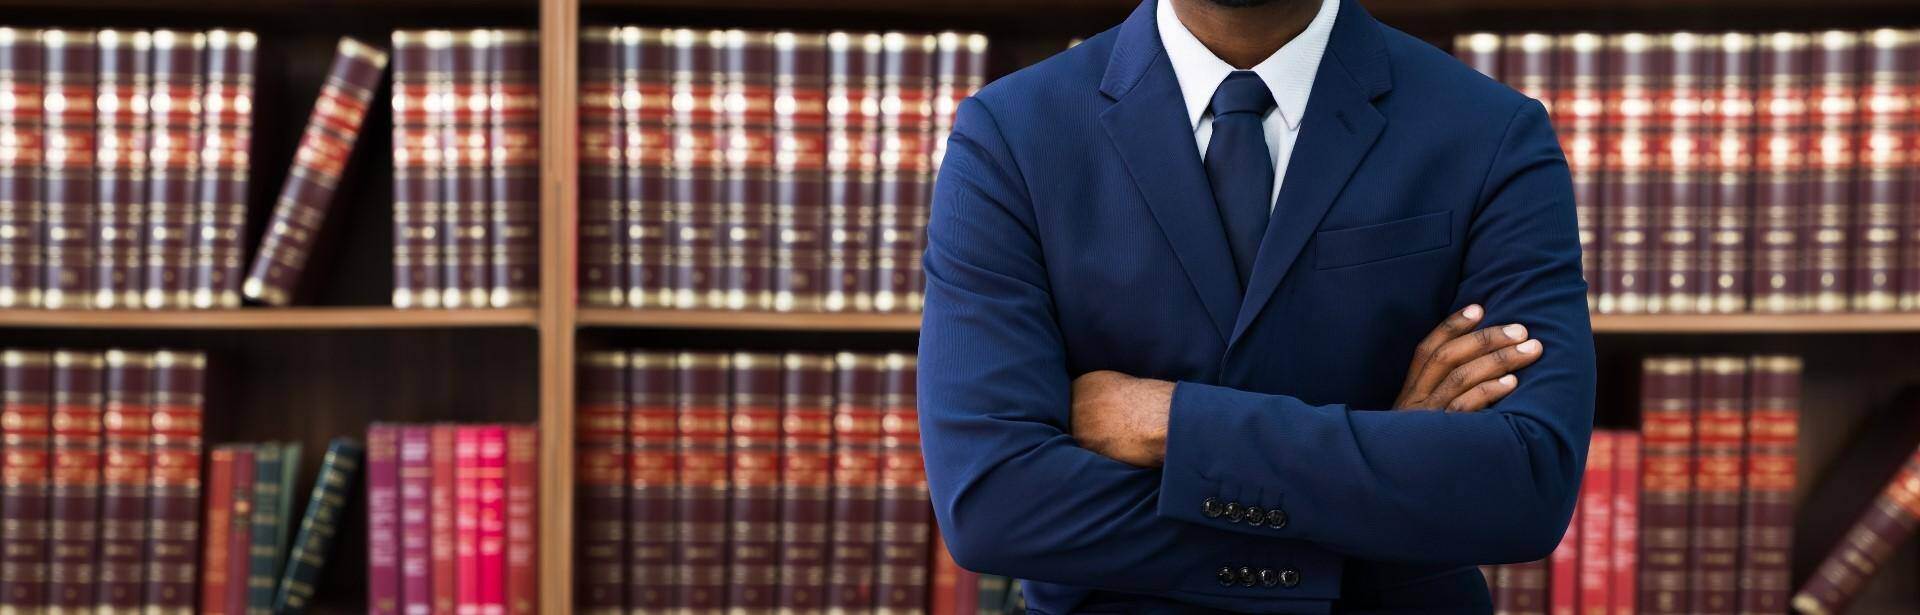 A black lawyer standing in front of a bookshelf of law book in Columbus, Georgia